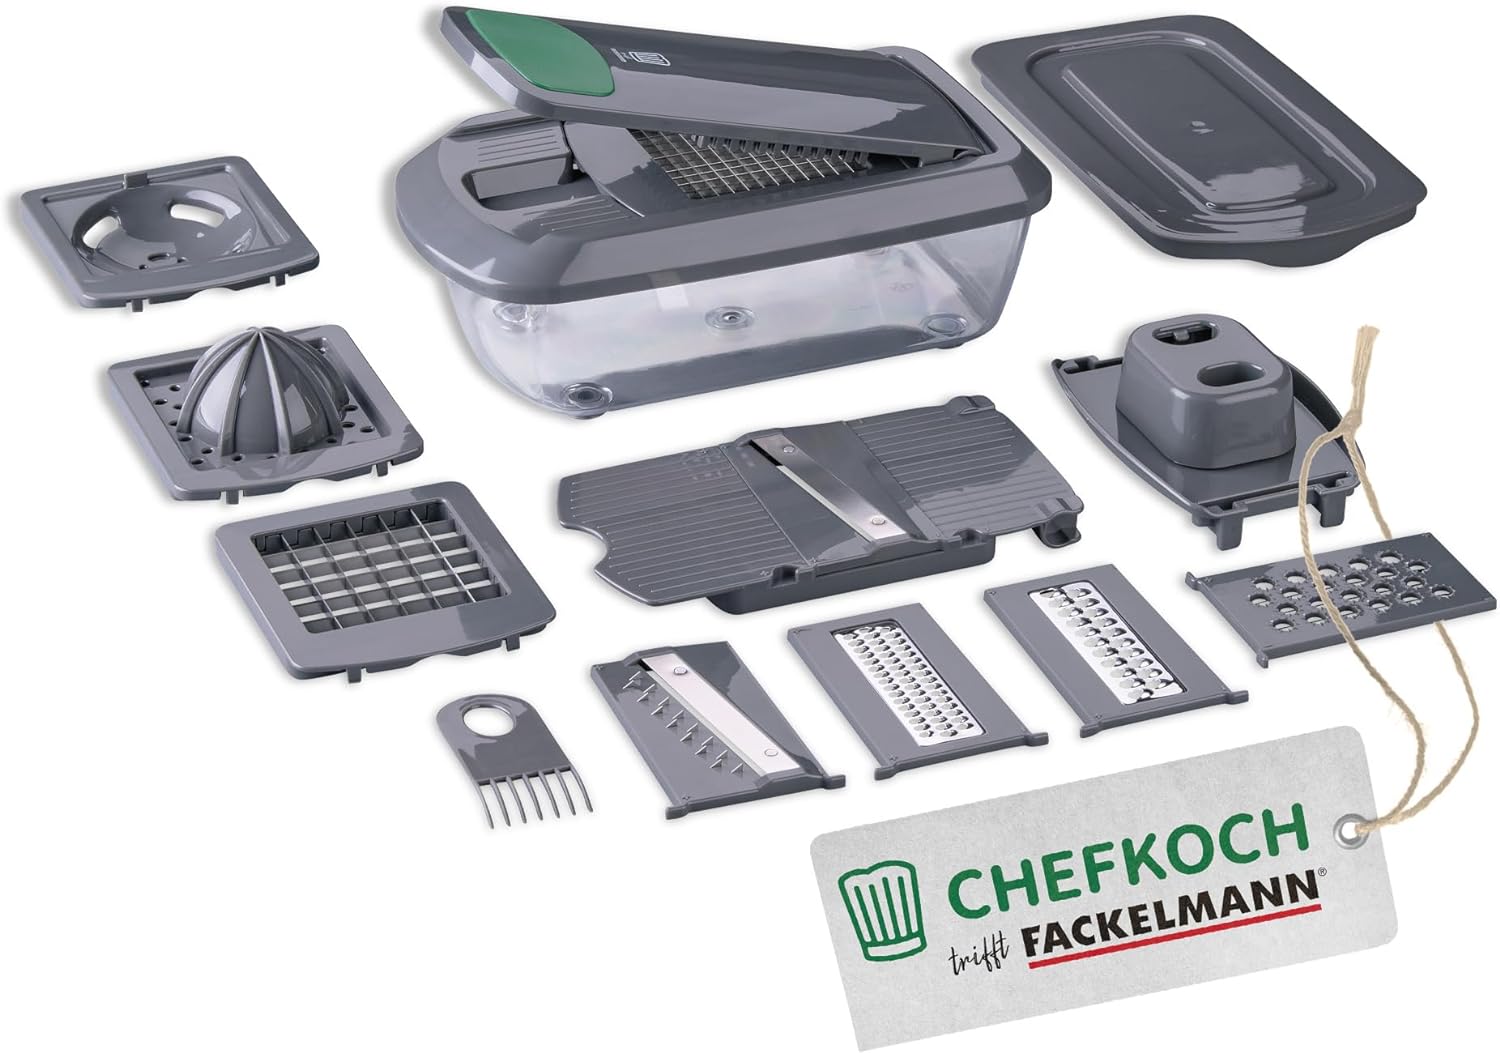 Chefkoch Multi-Purpose Vegetable Cutter 16 Pieces - The Multi-Tool for the Kitchen is Cutter, Dicer, Slicer, Chopper and Kitchen Cutter in One Set - Multi-Cutter for Vegetables
